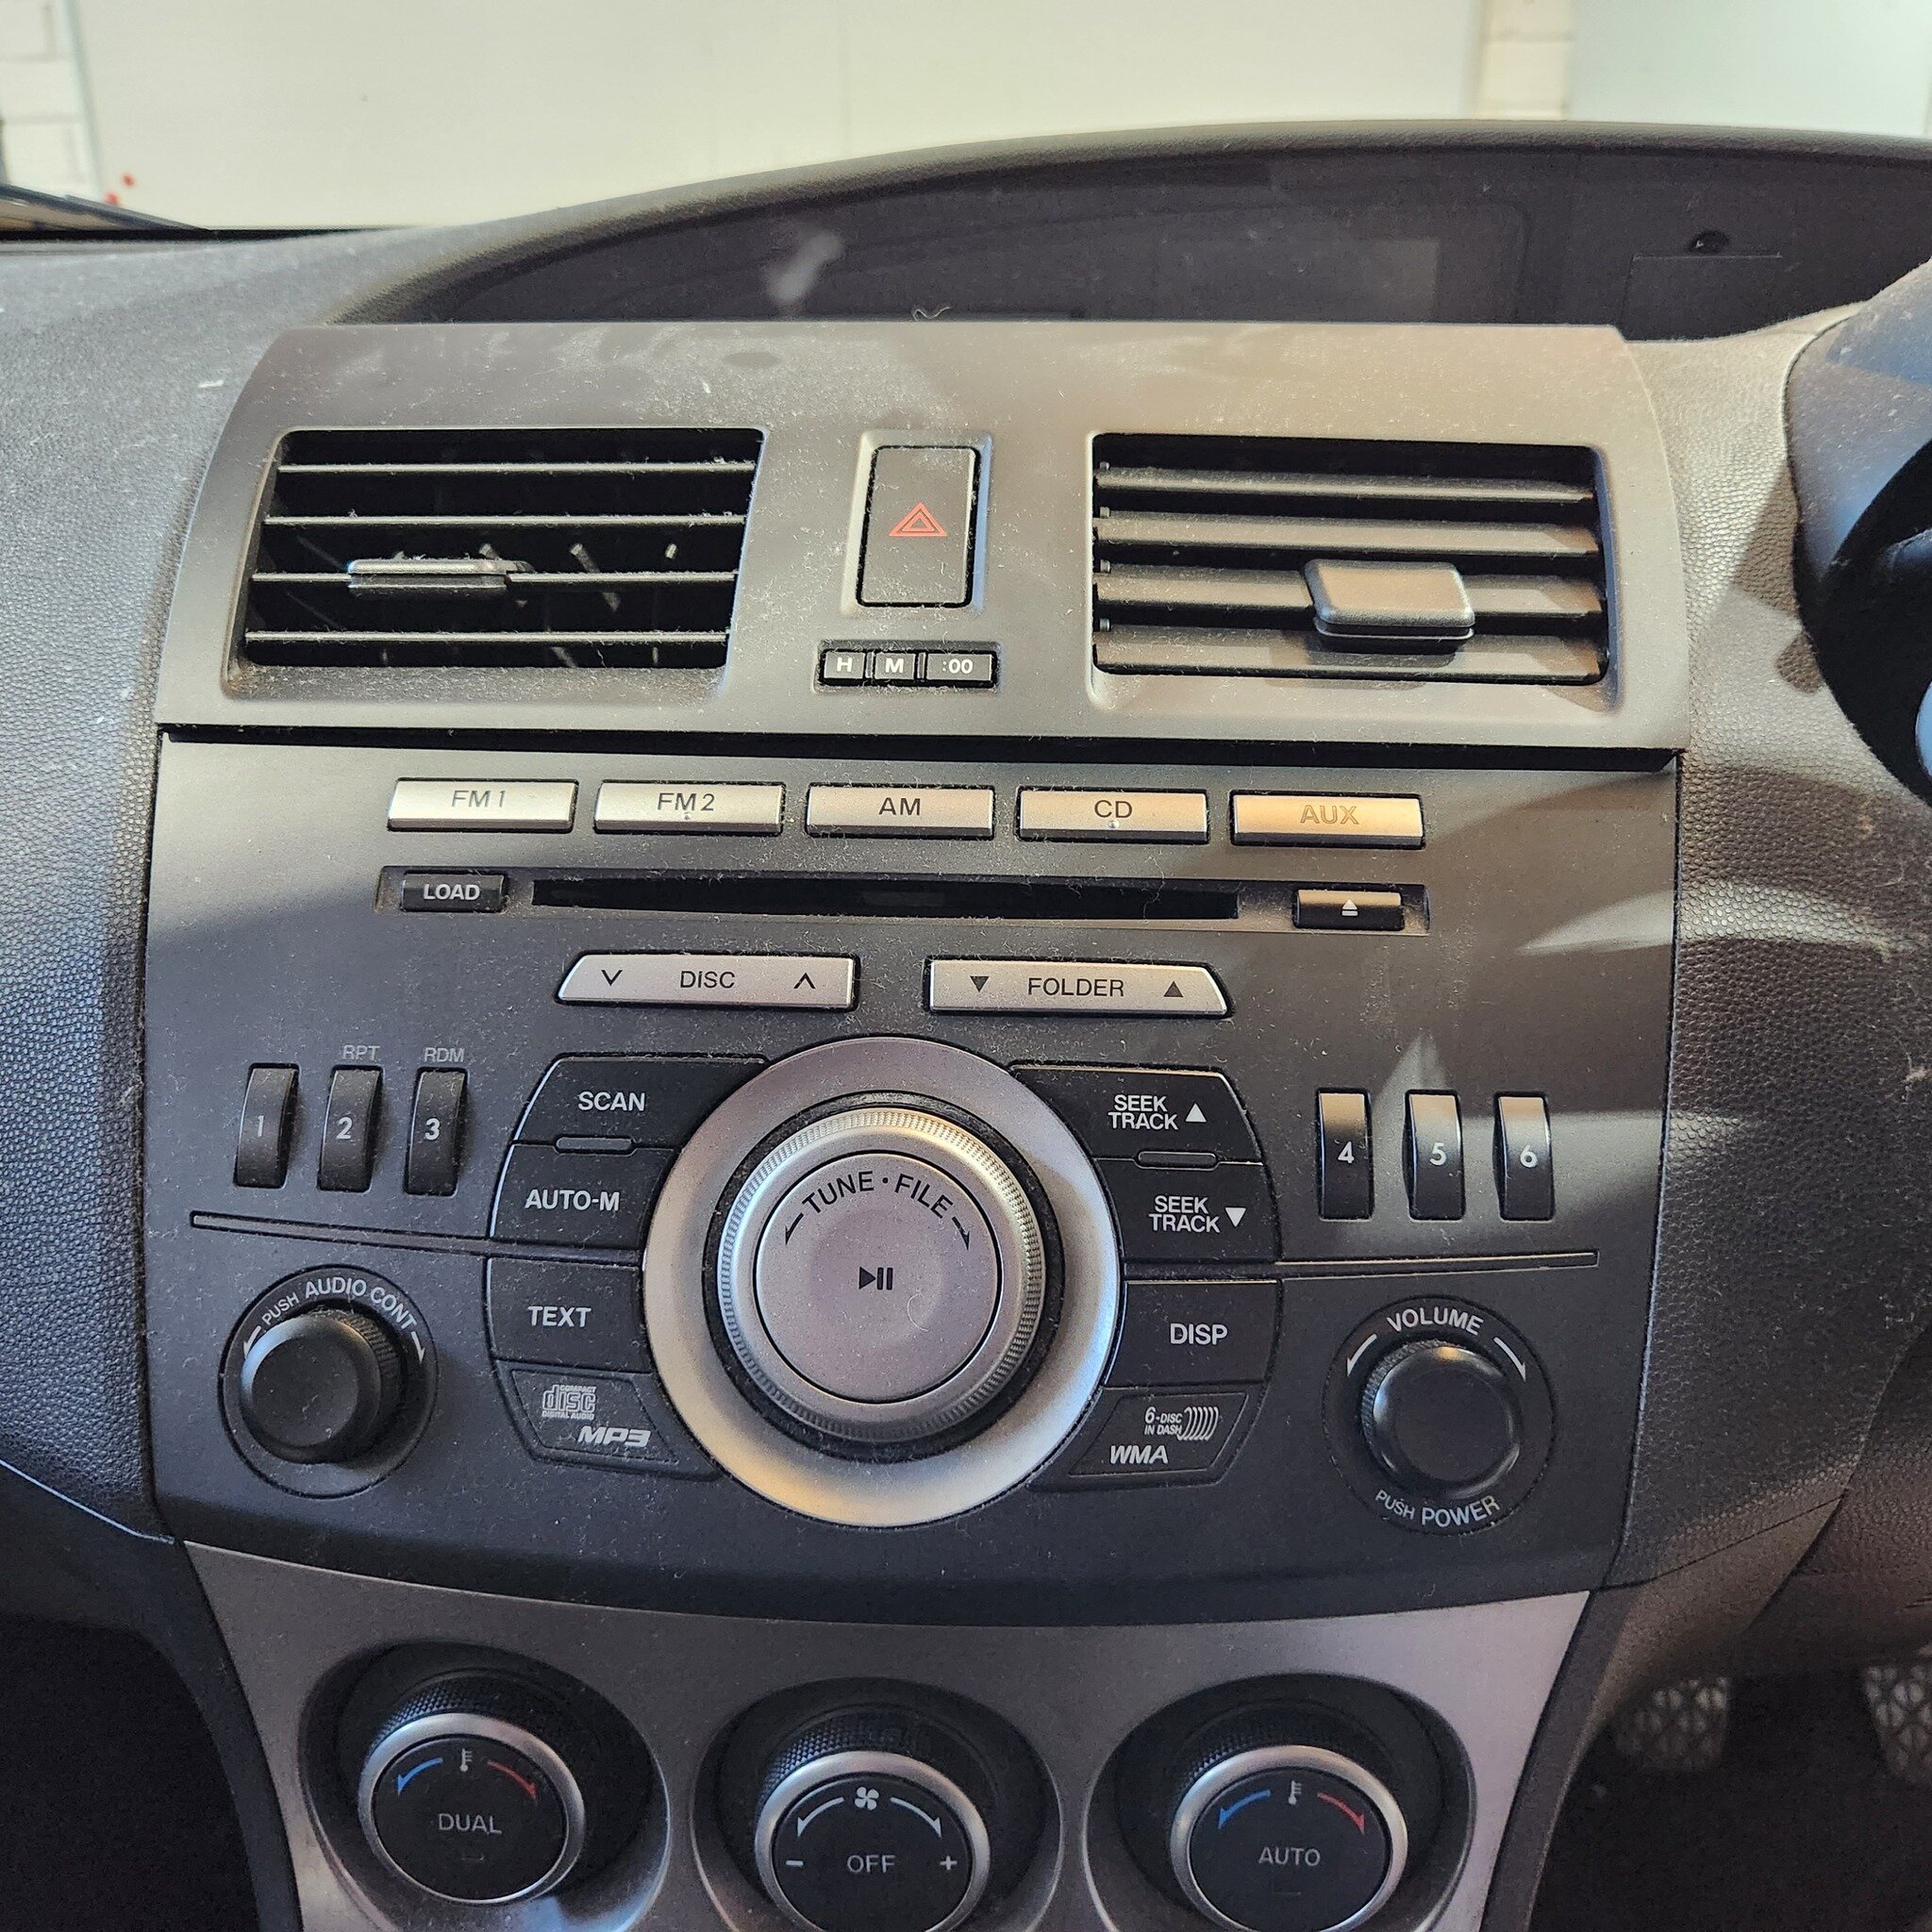 We don't just tackle prestige and performance here, and often we find that non-prestige cars are the most in need of some AIS attention. This Mazda 3 is a great example, as the radio looked (and worked) like it was from the early 90s, letting down wh